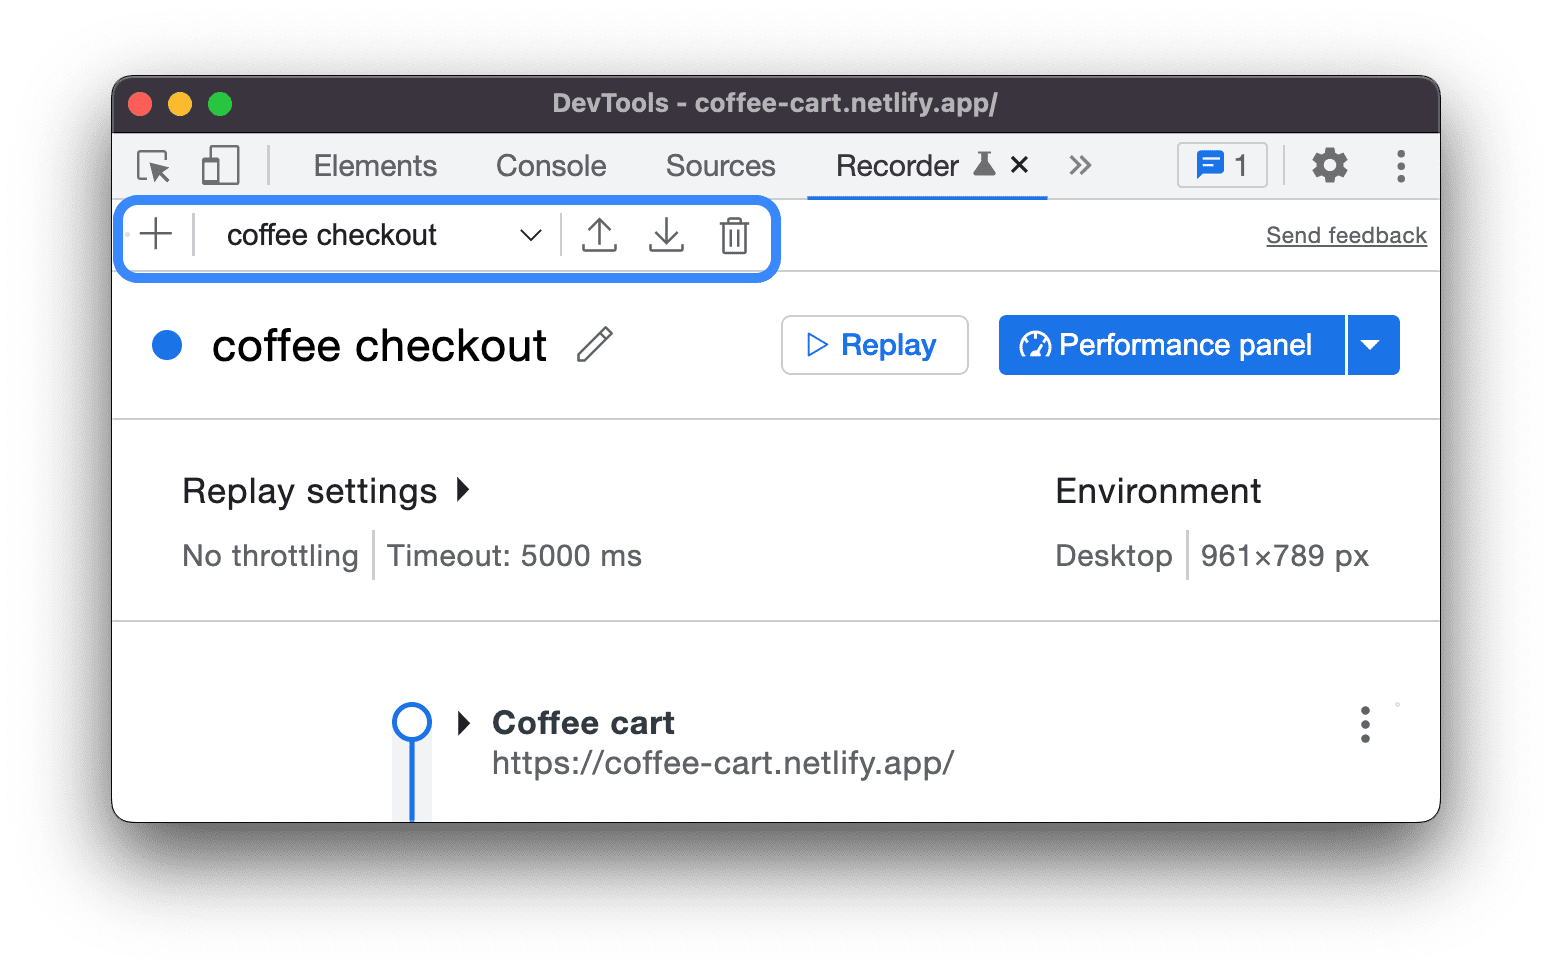 DevTools Recorder panel has a drop-down menu in the header which allows you to select a user flow to edit.